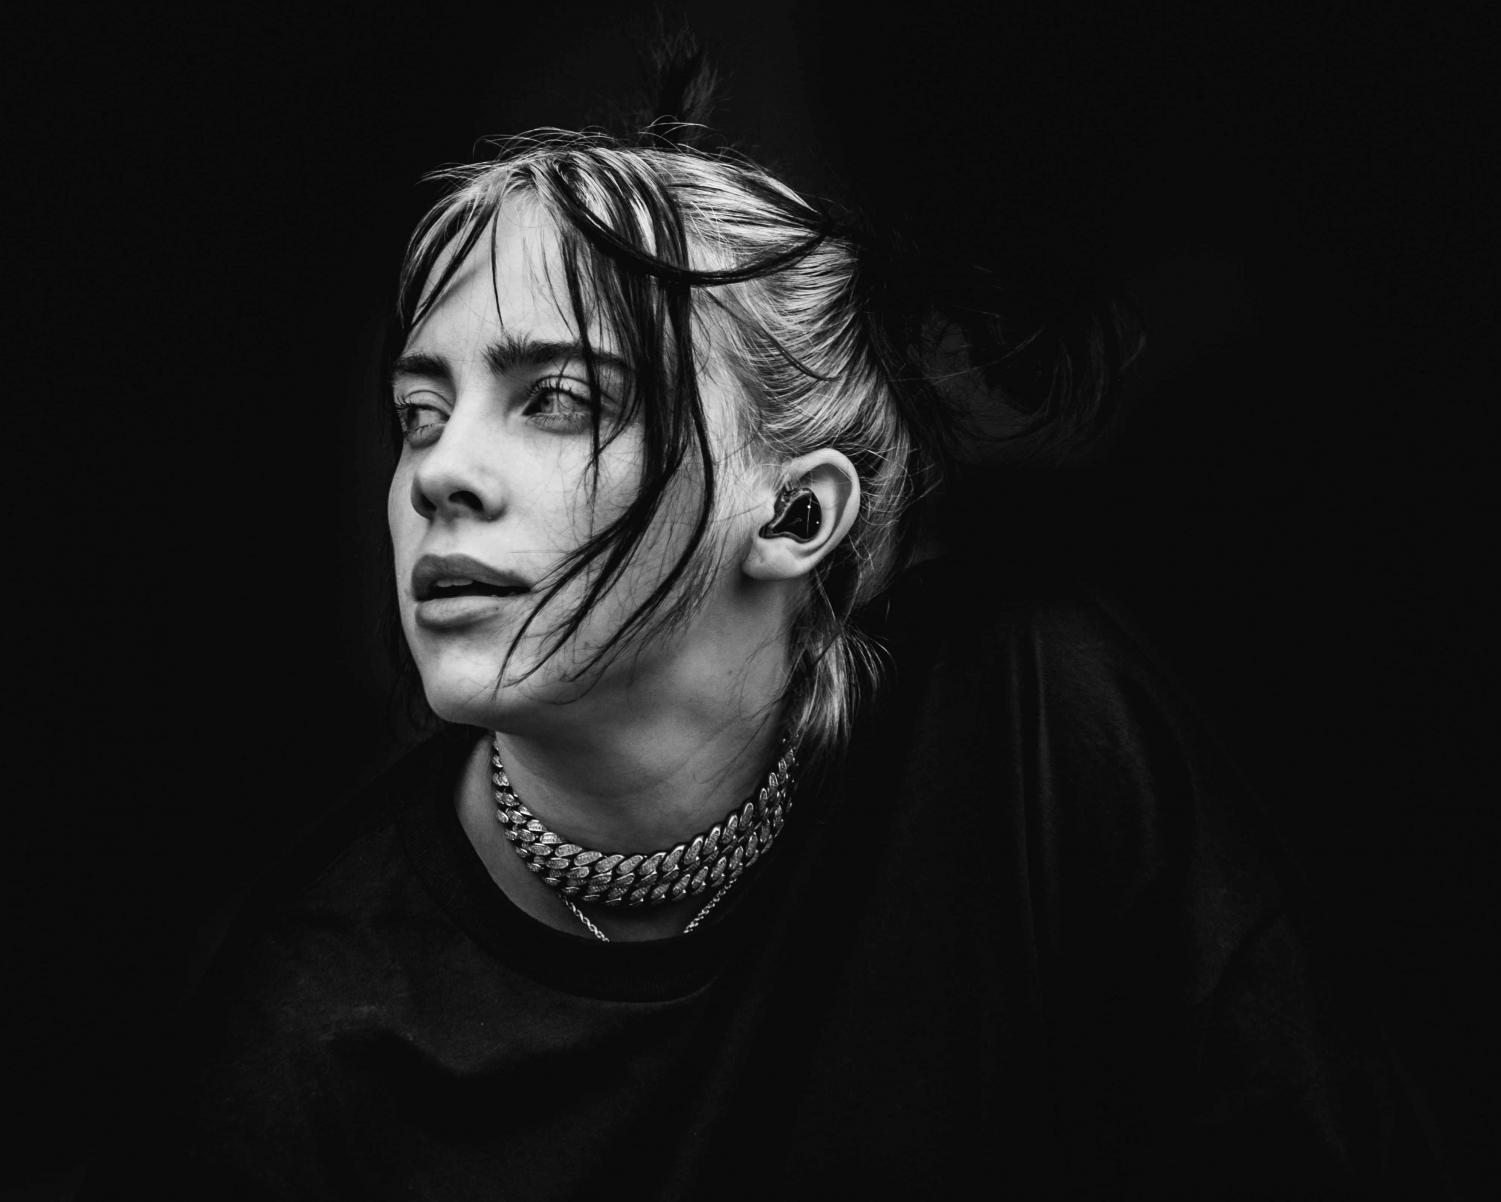 The World’s a Little Blurry Offers a Clearer Glimpse Into Billie Eilish